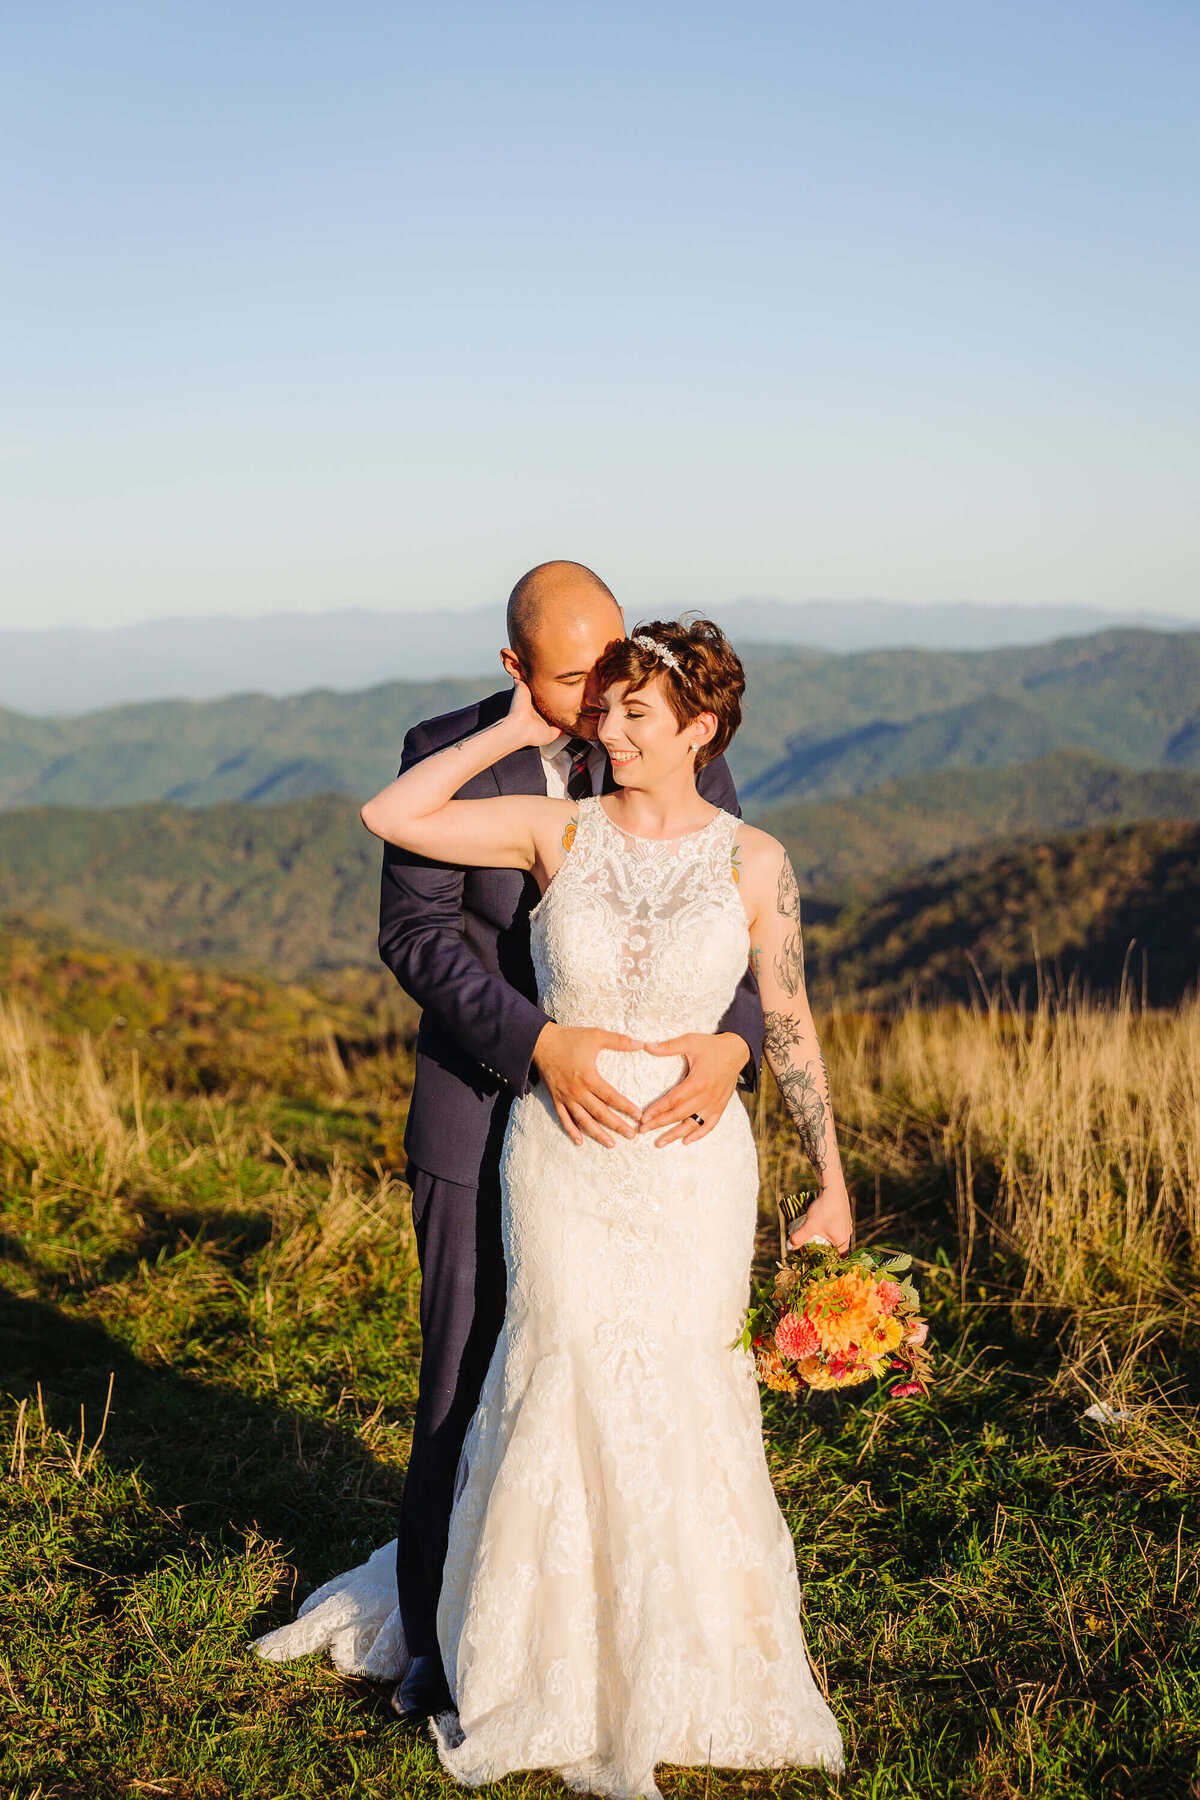 Max-Patch-NC-Mountain-Elopement-21